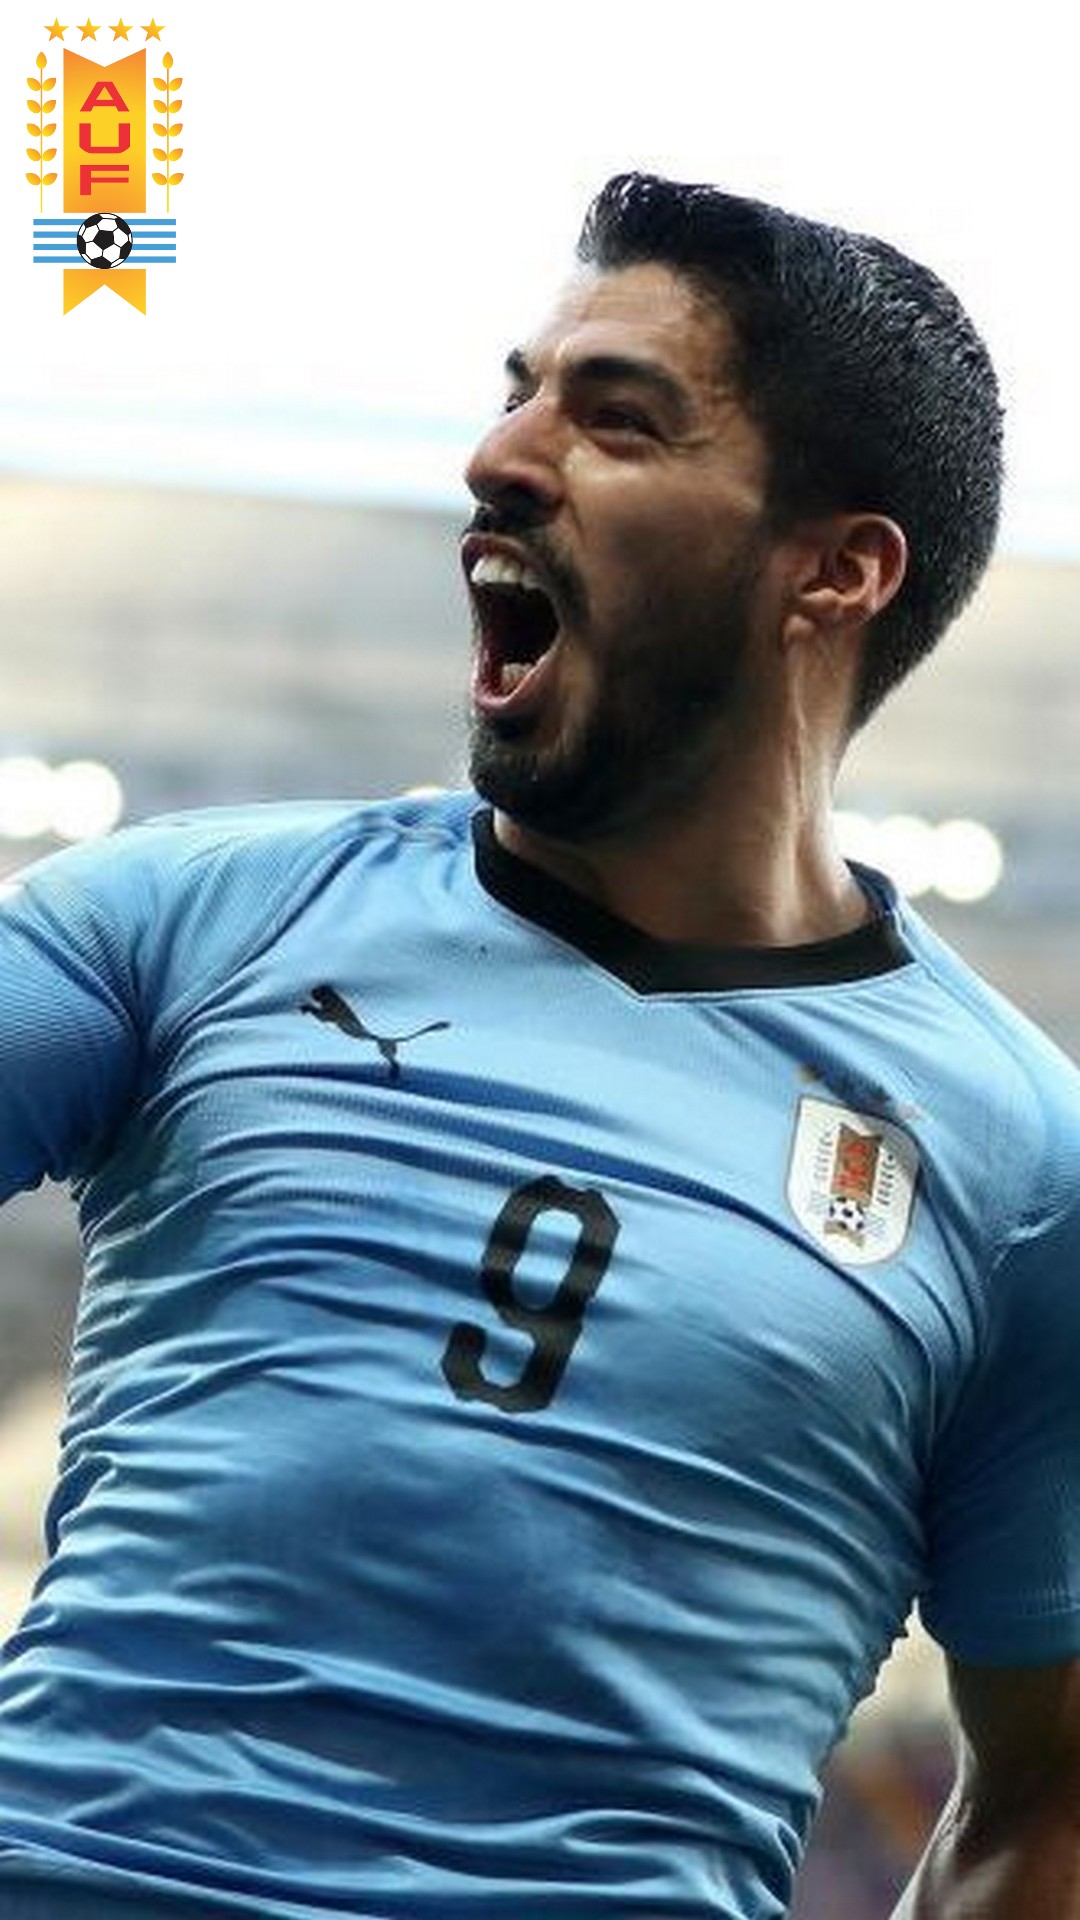 Wallpaper Luis Suarez Uruguay iPhone With Resolution 1080X1920 pixel. You can make this wallpaper for your Mac or Windows Desktop Background, iPhone, Android or Tablet and another Smartphone device for free